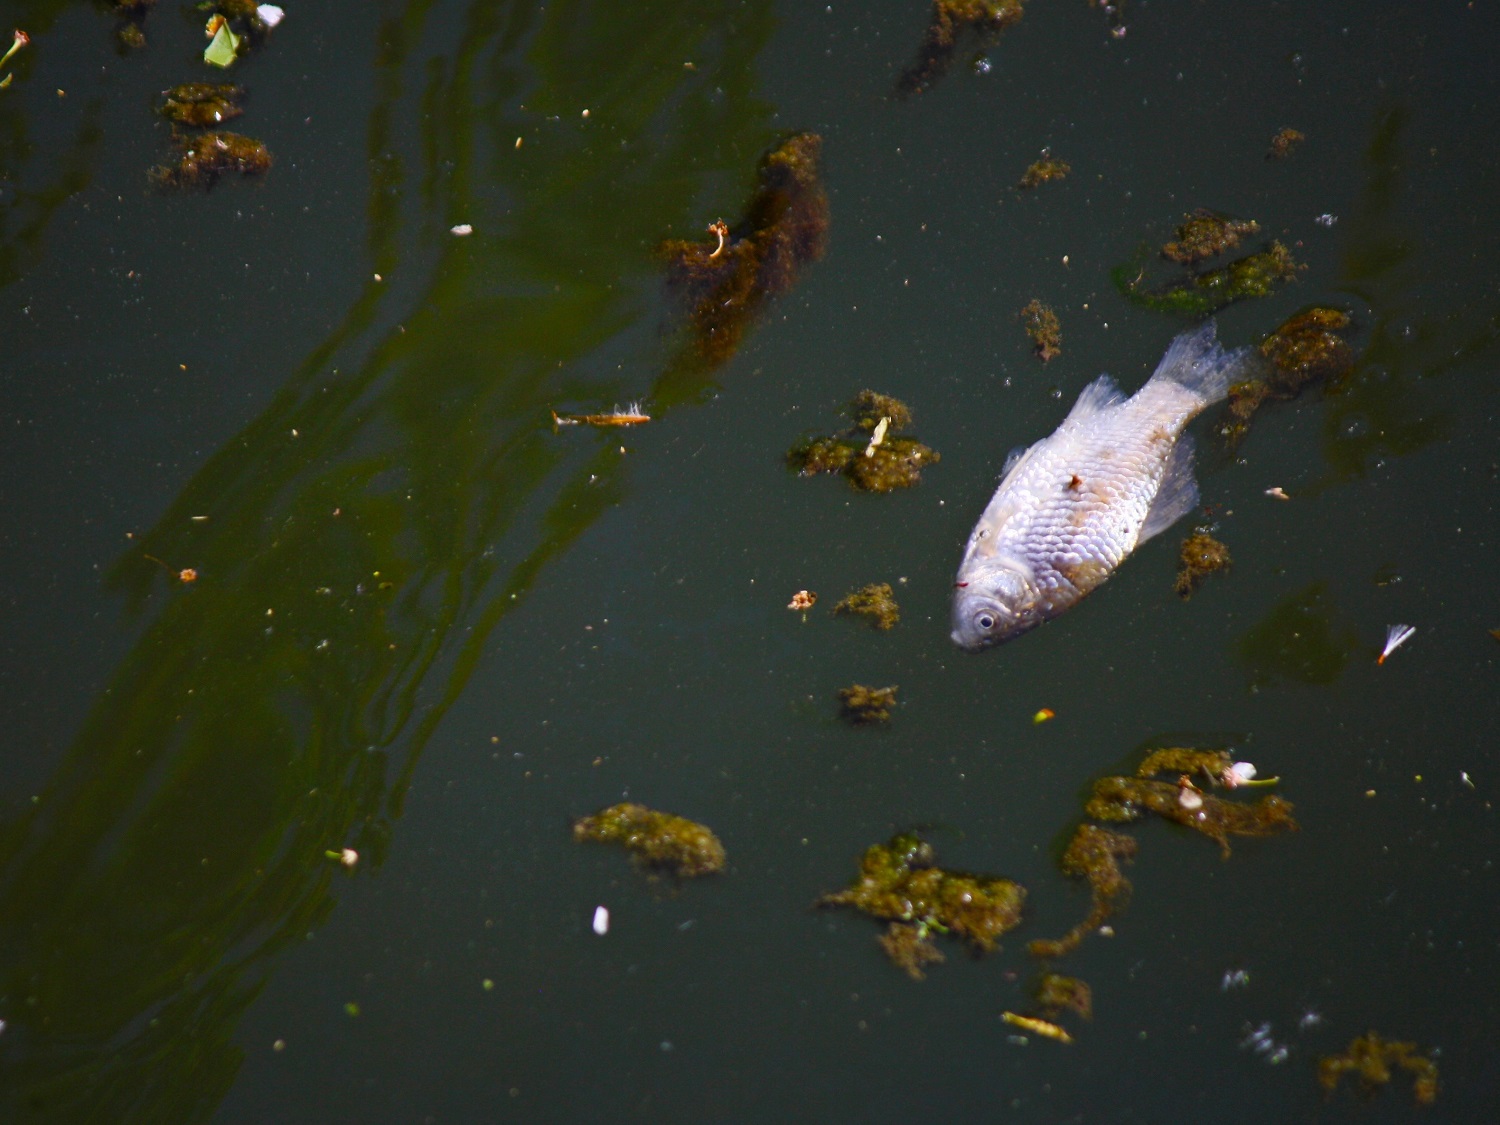 Fish floating in polluted river. Credit RSPB